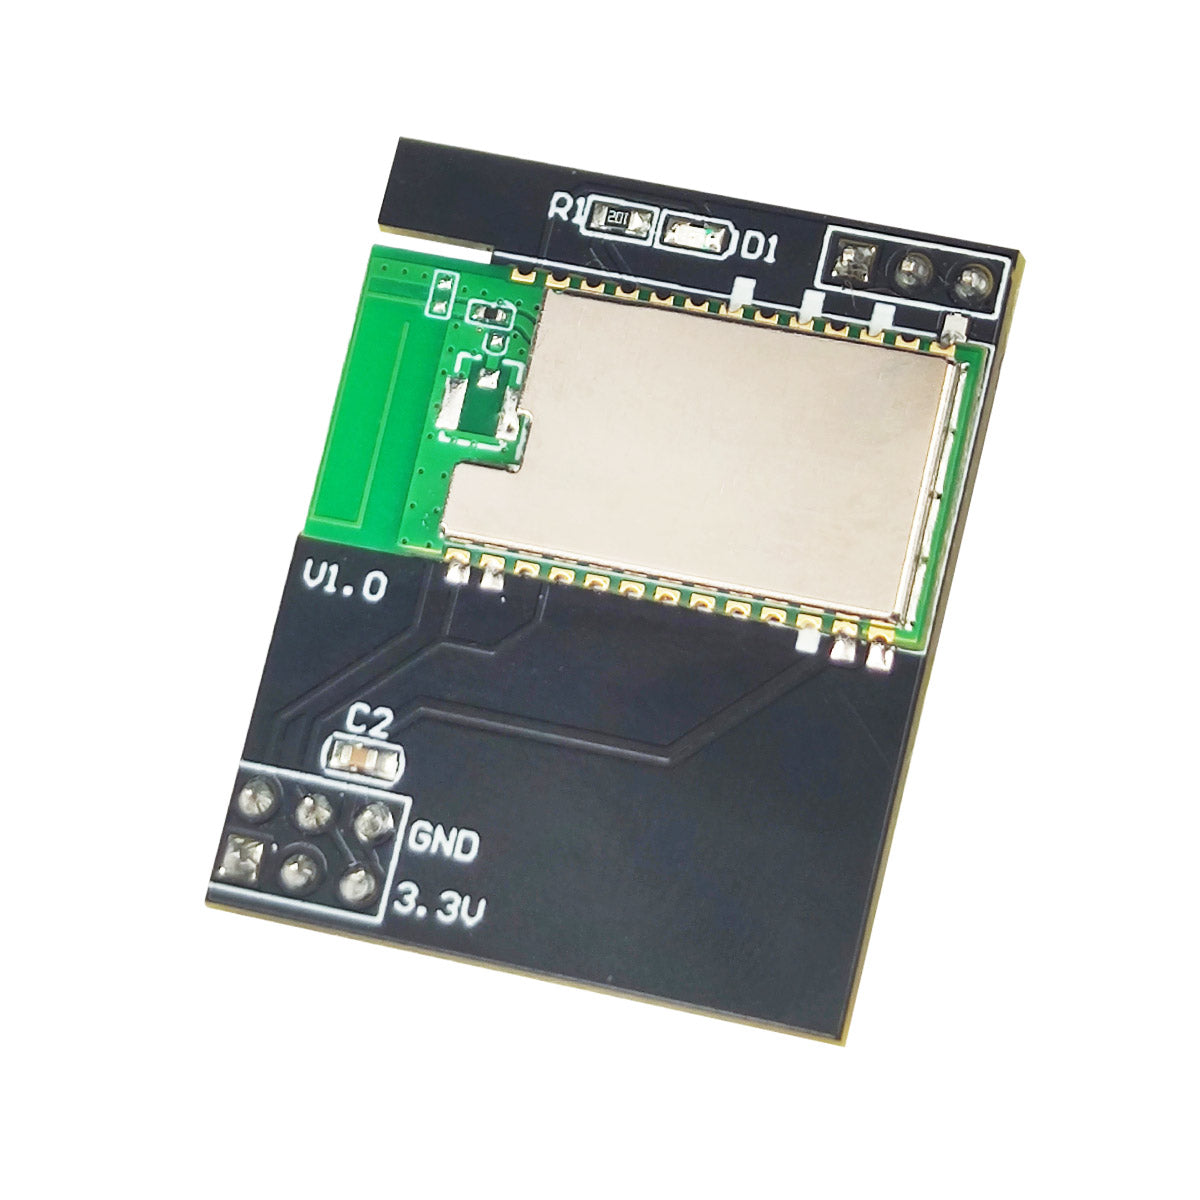 Bluetooth Module: Compatible with Hiwonder Servo Controller